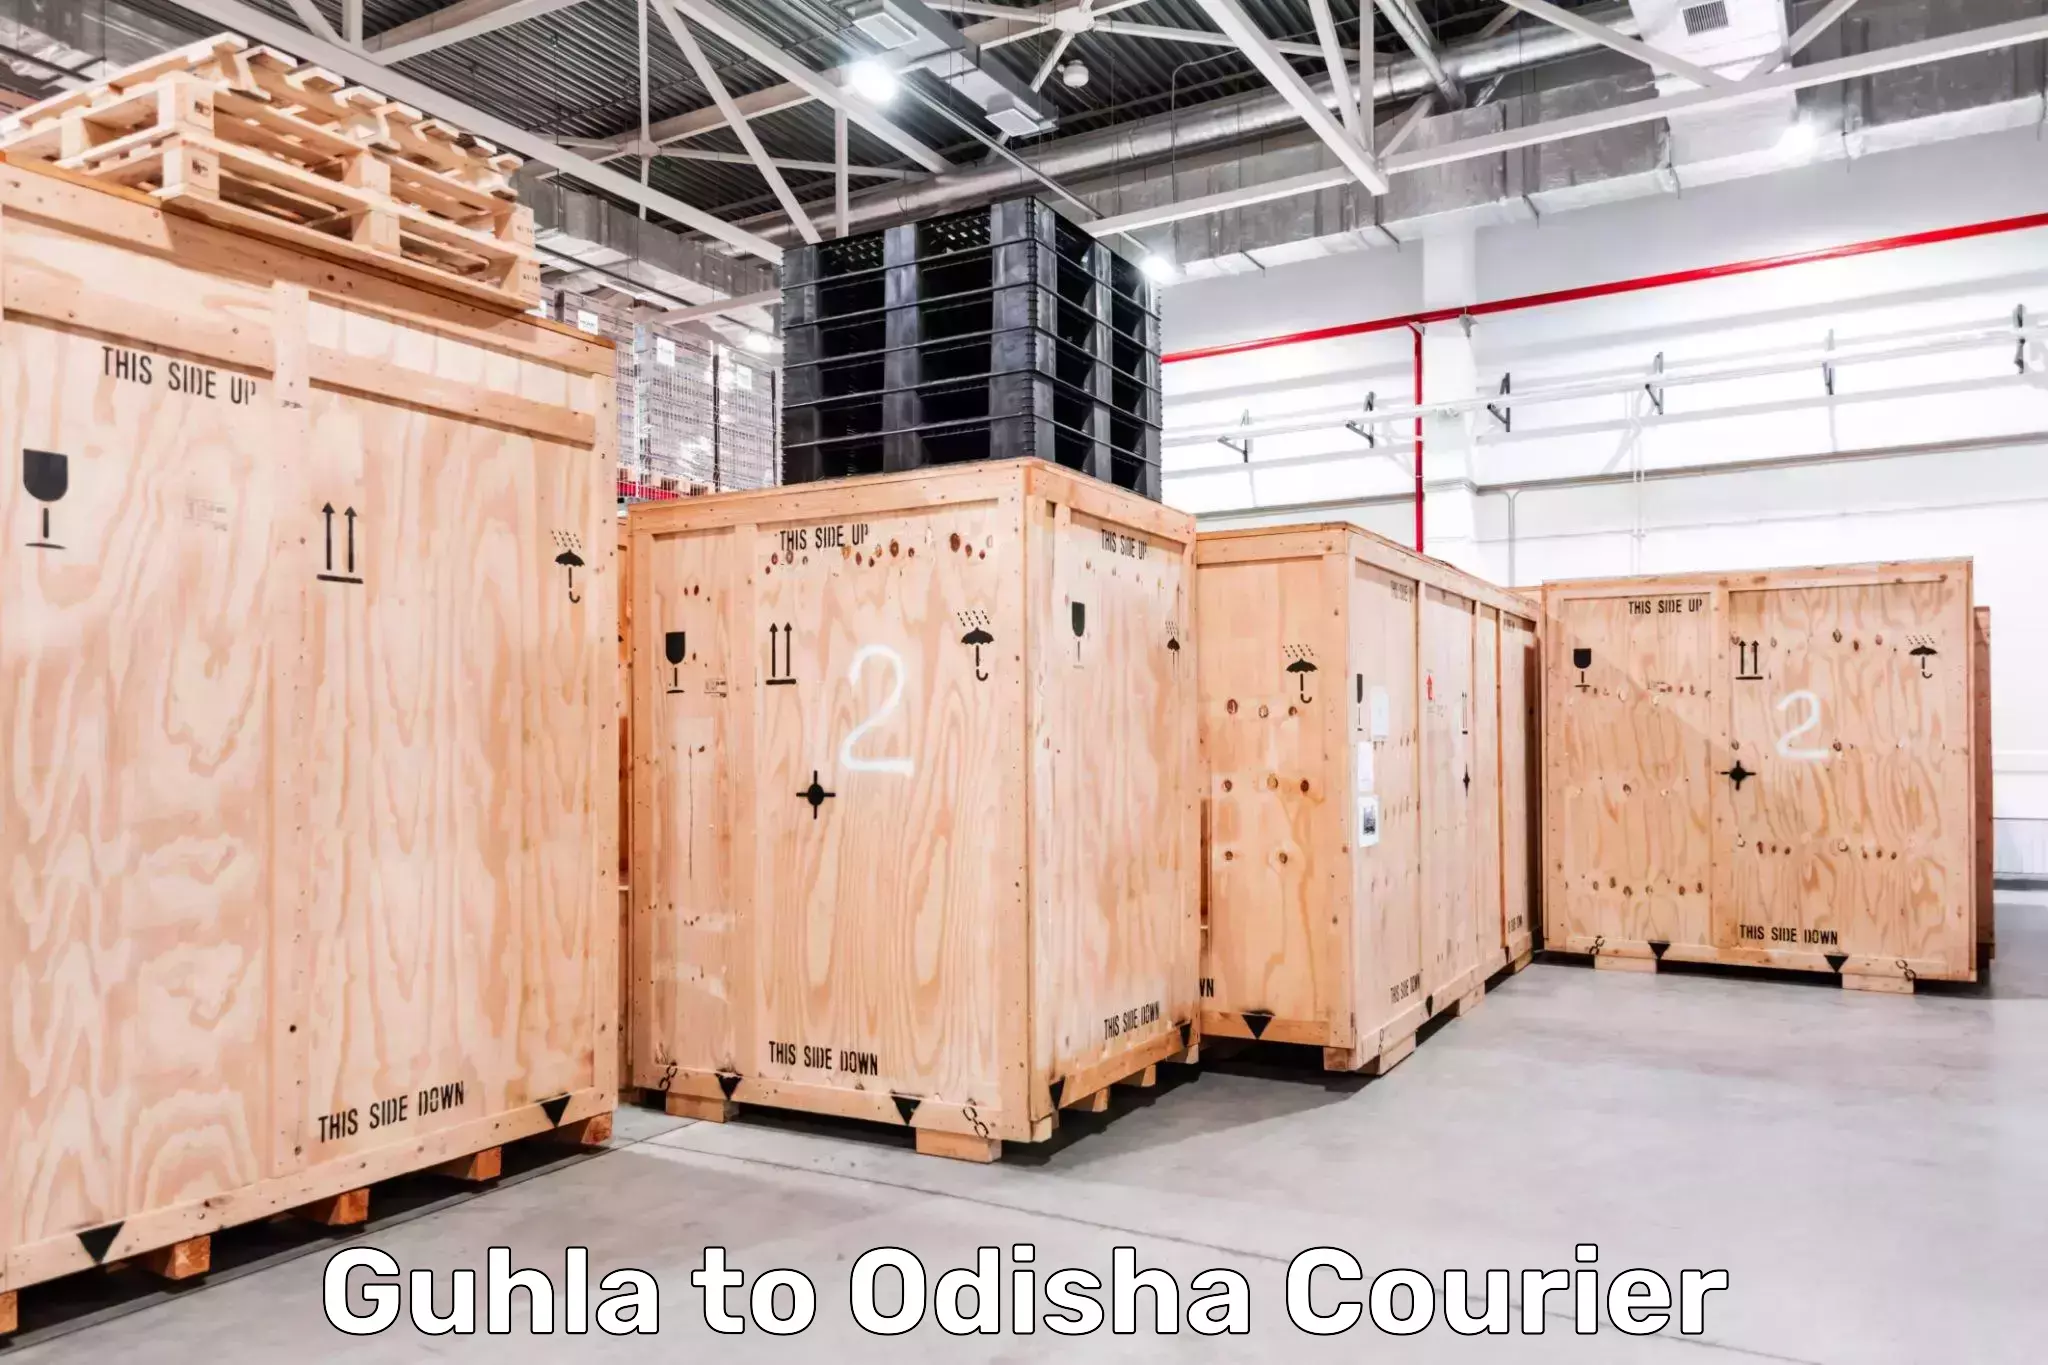 Cost-effective freight solutions Guhla to Odisha